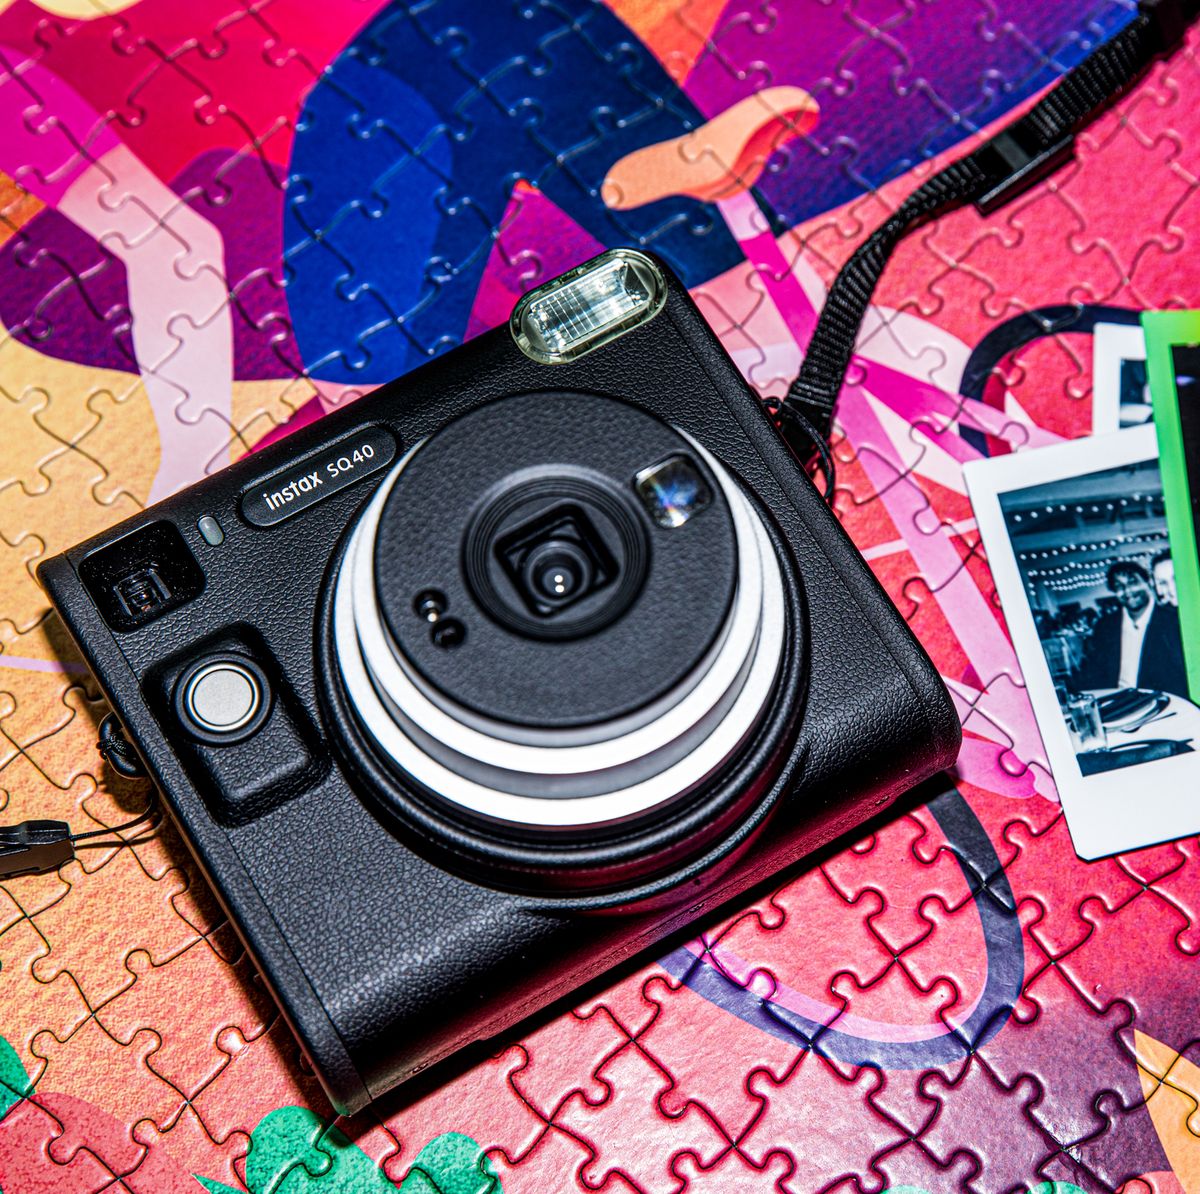 Fujifilm Instax SQ40 Review: An Instant Camera With Old-School Flavor